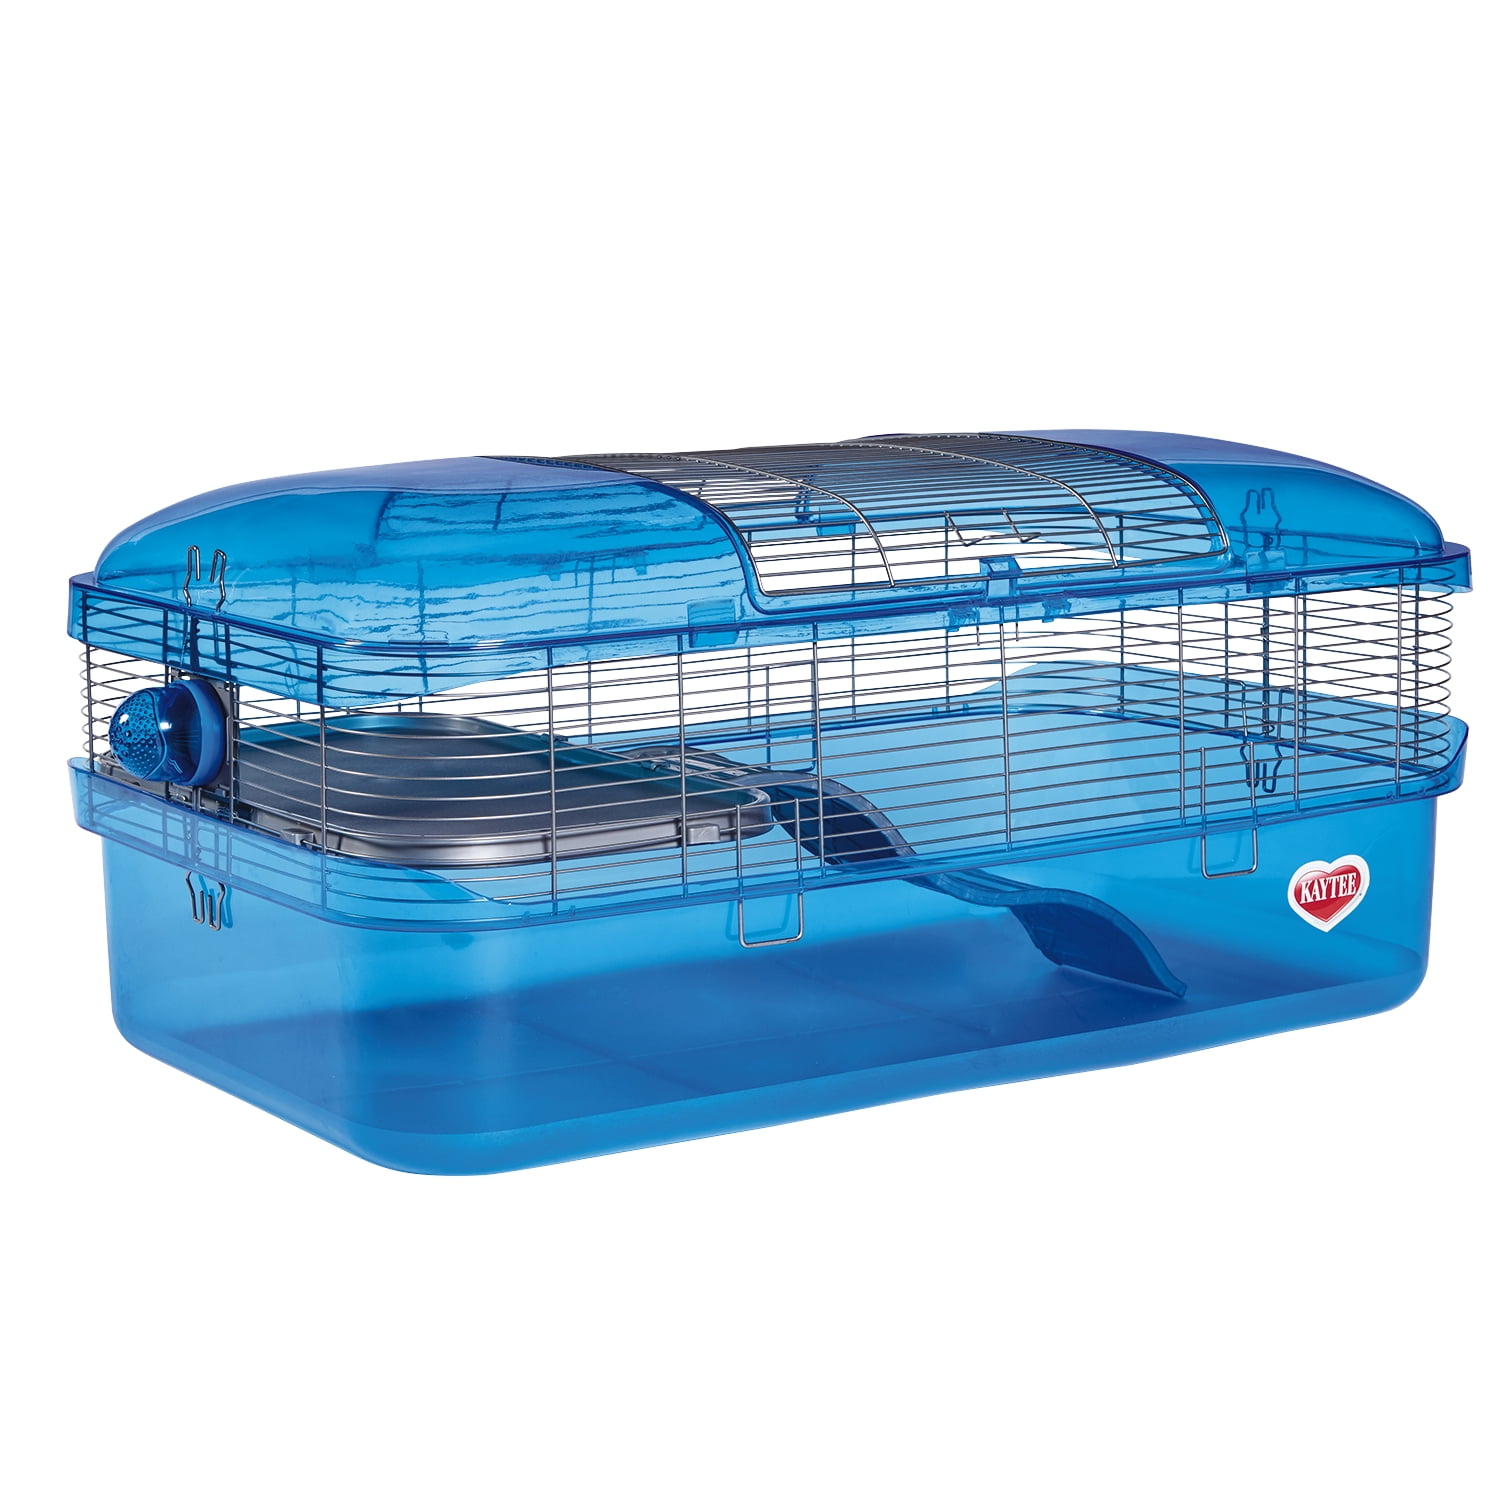 crittertrail hamster cage